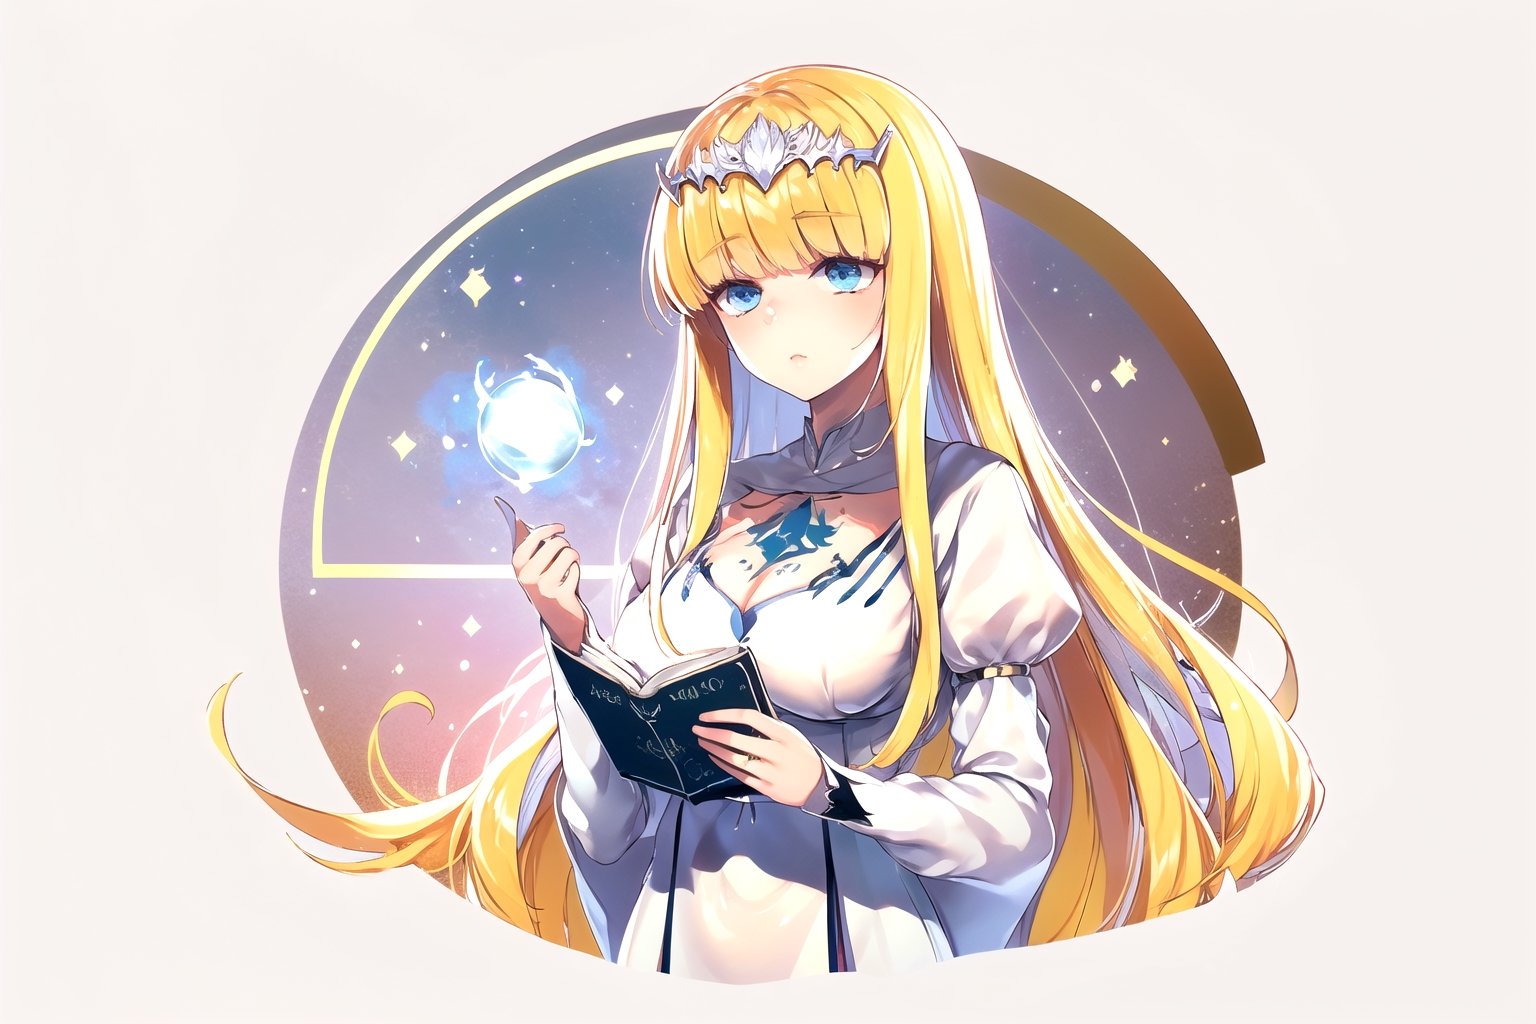 //Quality,
(masterpiece), (best quality), 8k illustration
,//Character,
1girl, solo, calca, blonde hair, very long hair, extremely long hair, blue eyes, medium breast, long sleeve, white dress, white tiara, blonde hair
,//Fashion,
,//Background,
indoors
,//Others,
magic book, forefather of magic, magical realm